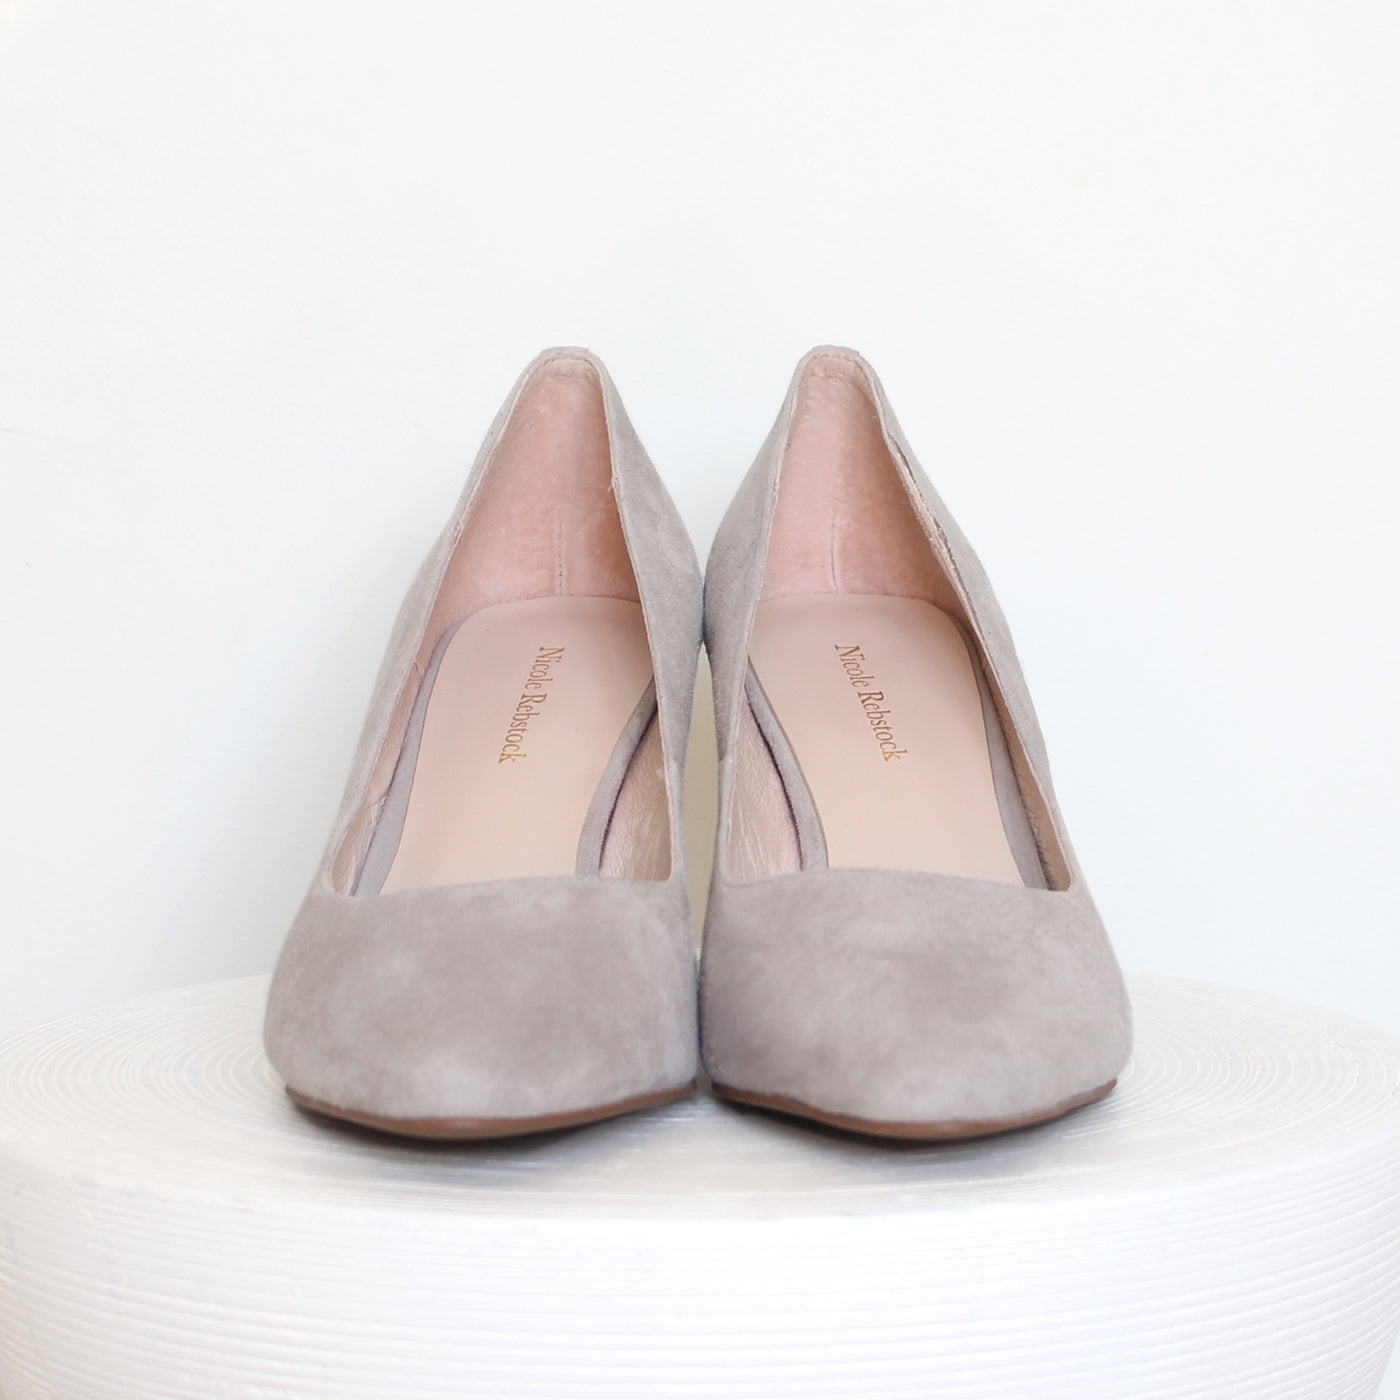 Jade 75mm | Taupe suede